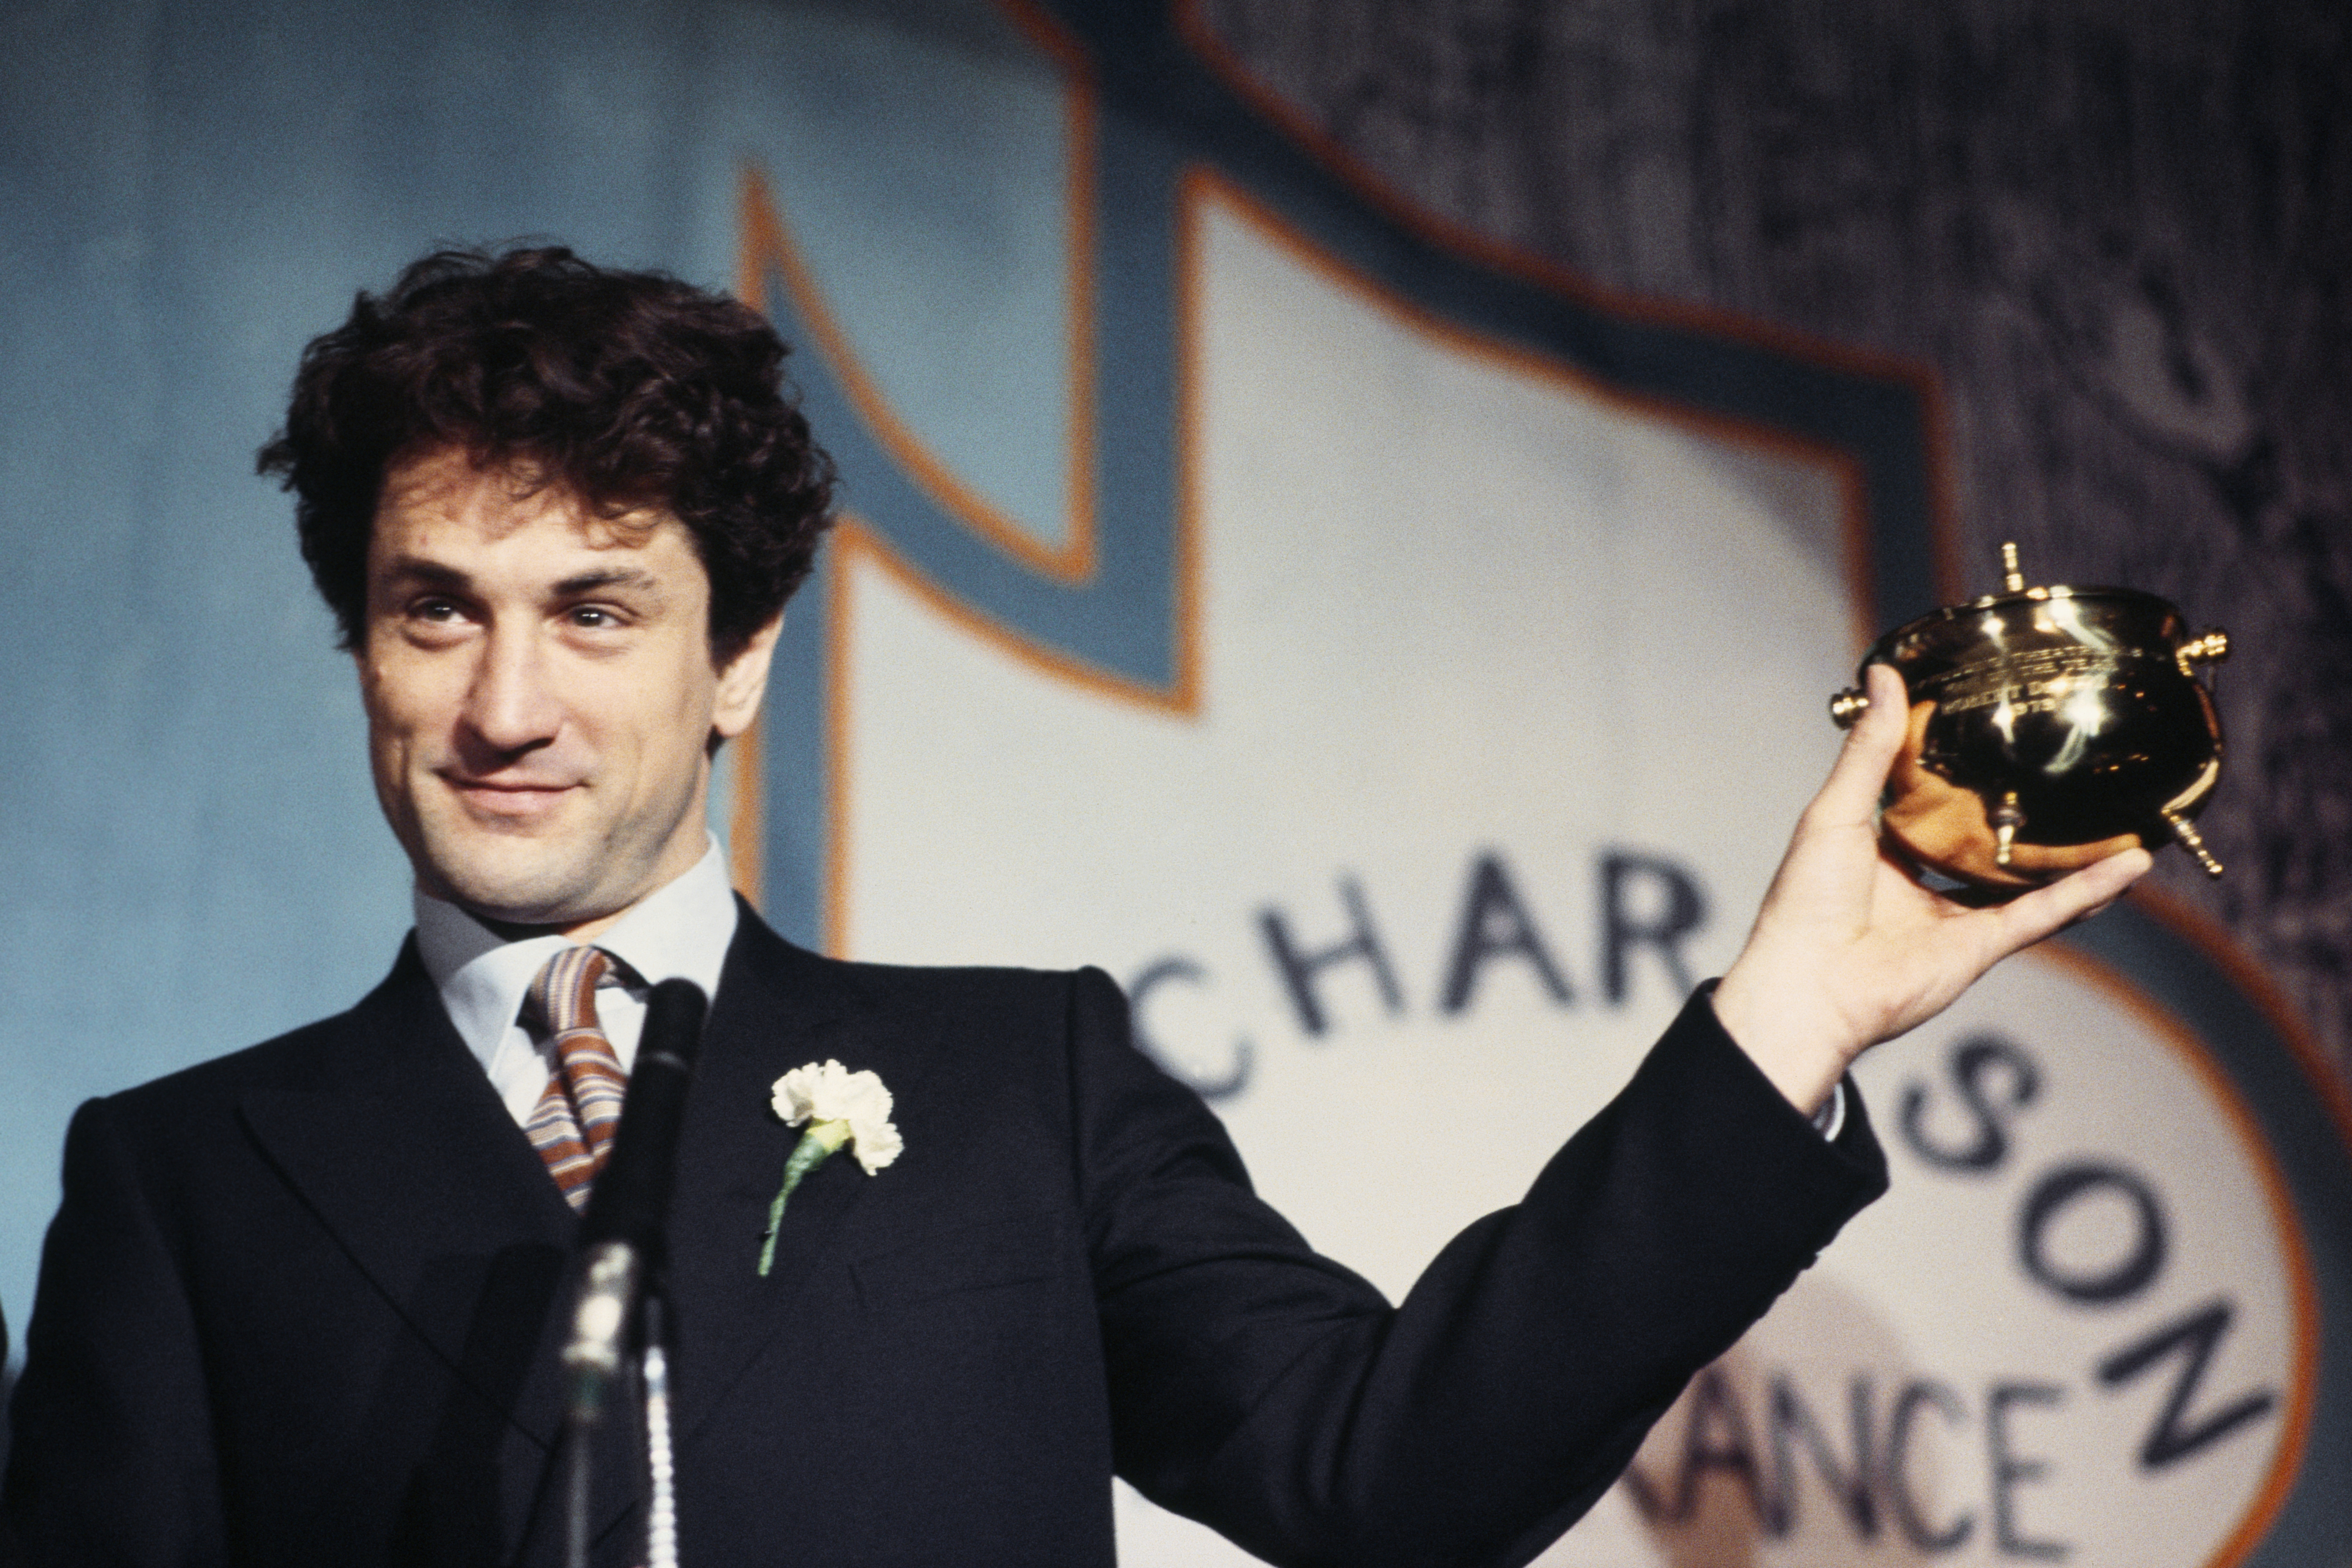 Robert De Niro after he won the Hasty Pudding Man of the Year award in 1979 | Source: Getty Images